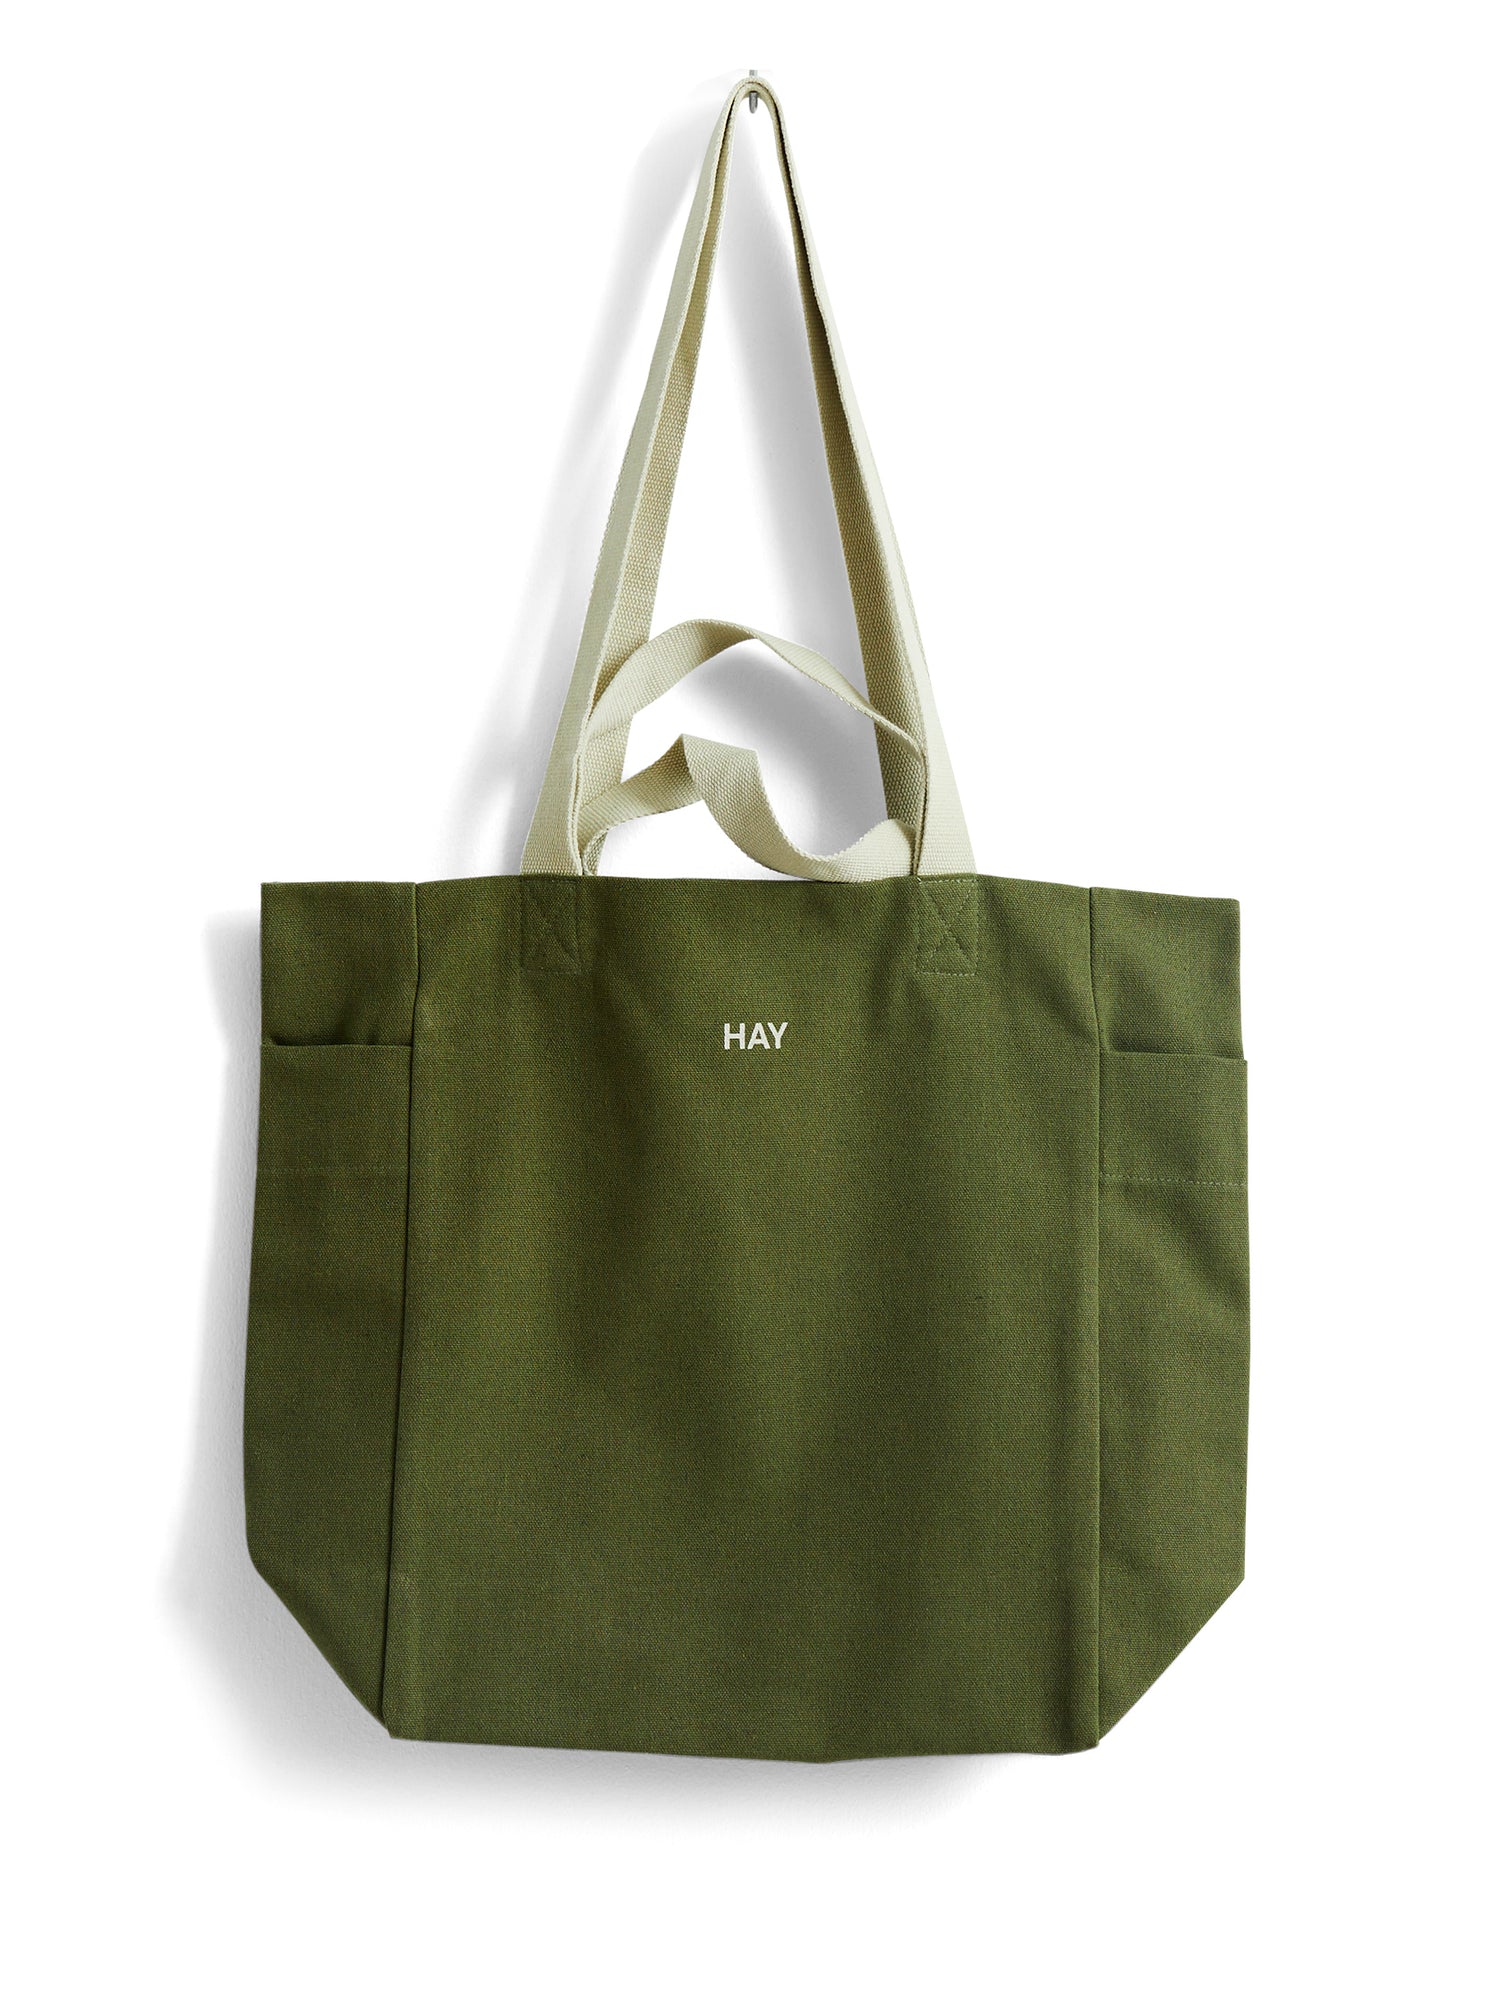 Everyday Tote Bag (4 Colours)